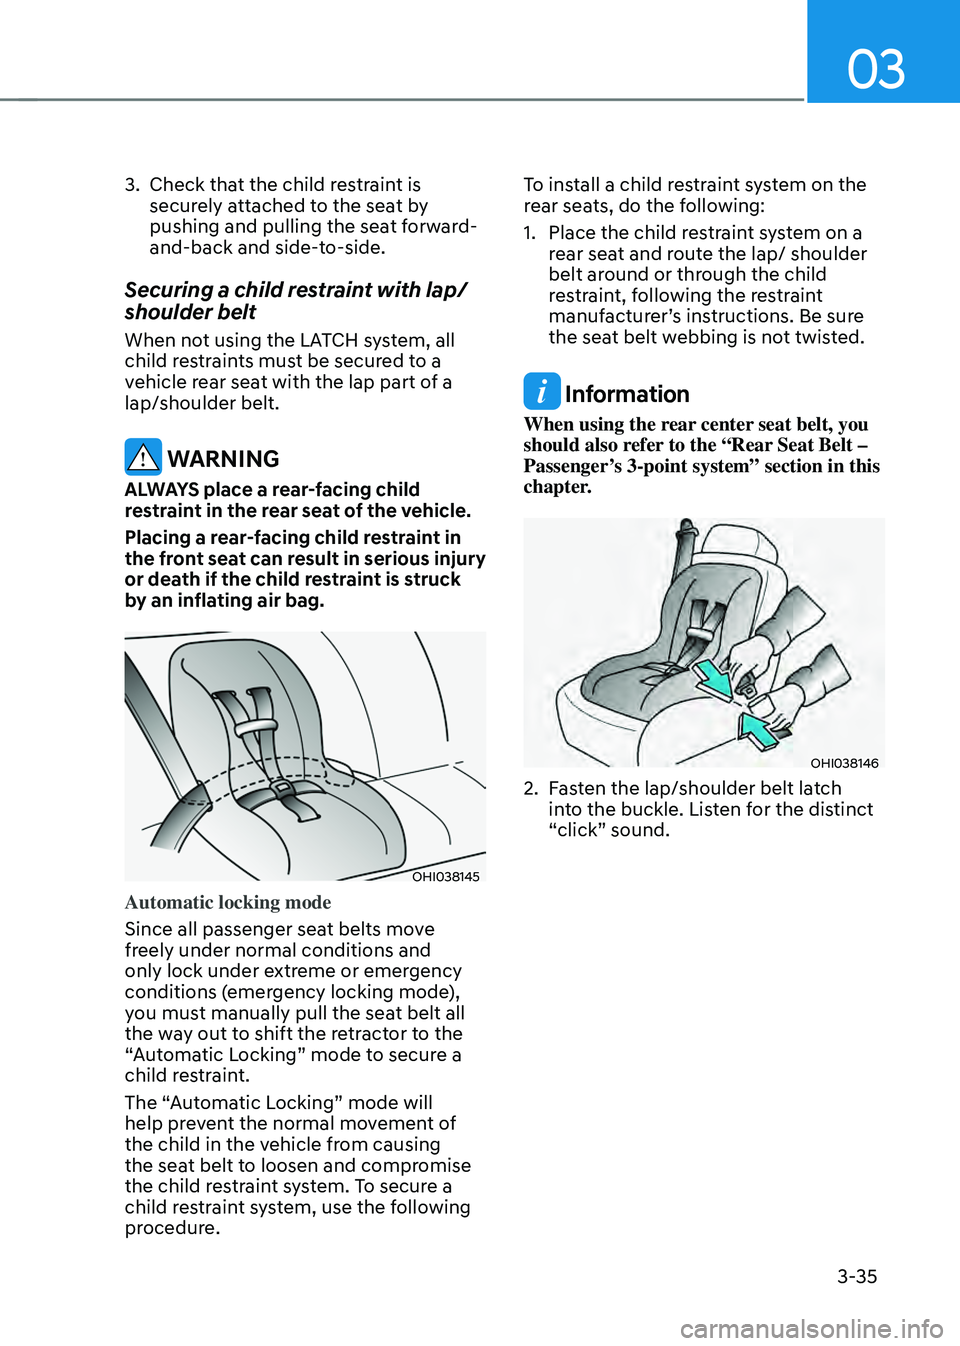 HYUNDAI SONATA HYBRID 2022  Owners Manual 03
3-35
3. Check that the child restraint is 
securely attached to the seat by 
pushing and pulling the seat forward-
and-back and side-to-side.
Securing a child restraint with lap/
shoulder belt
When